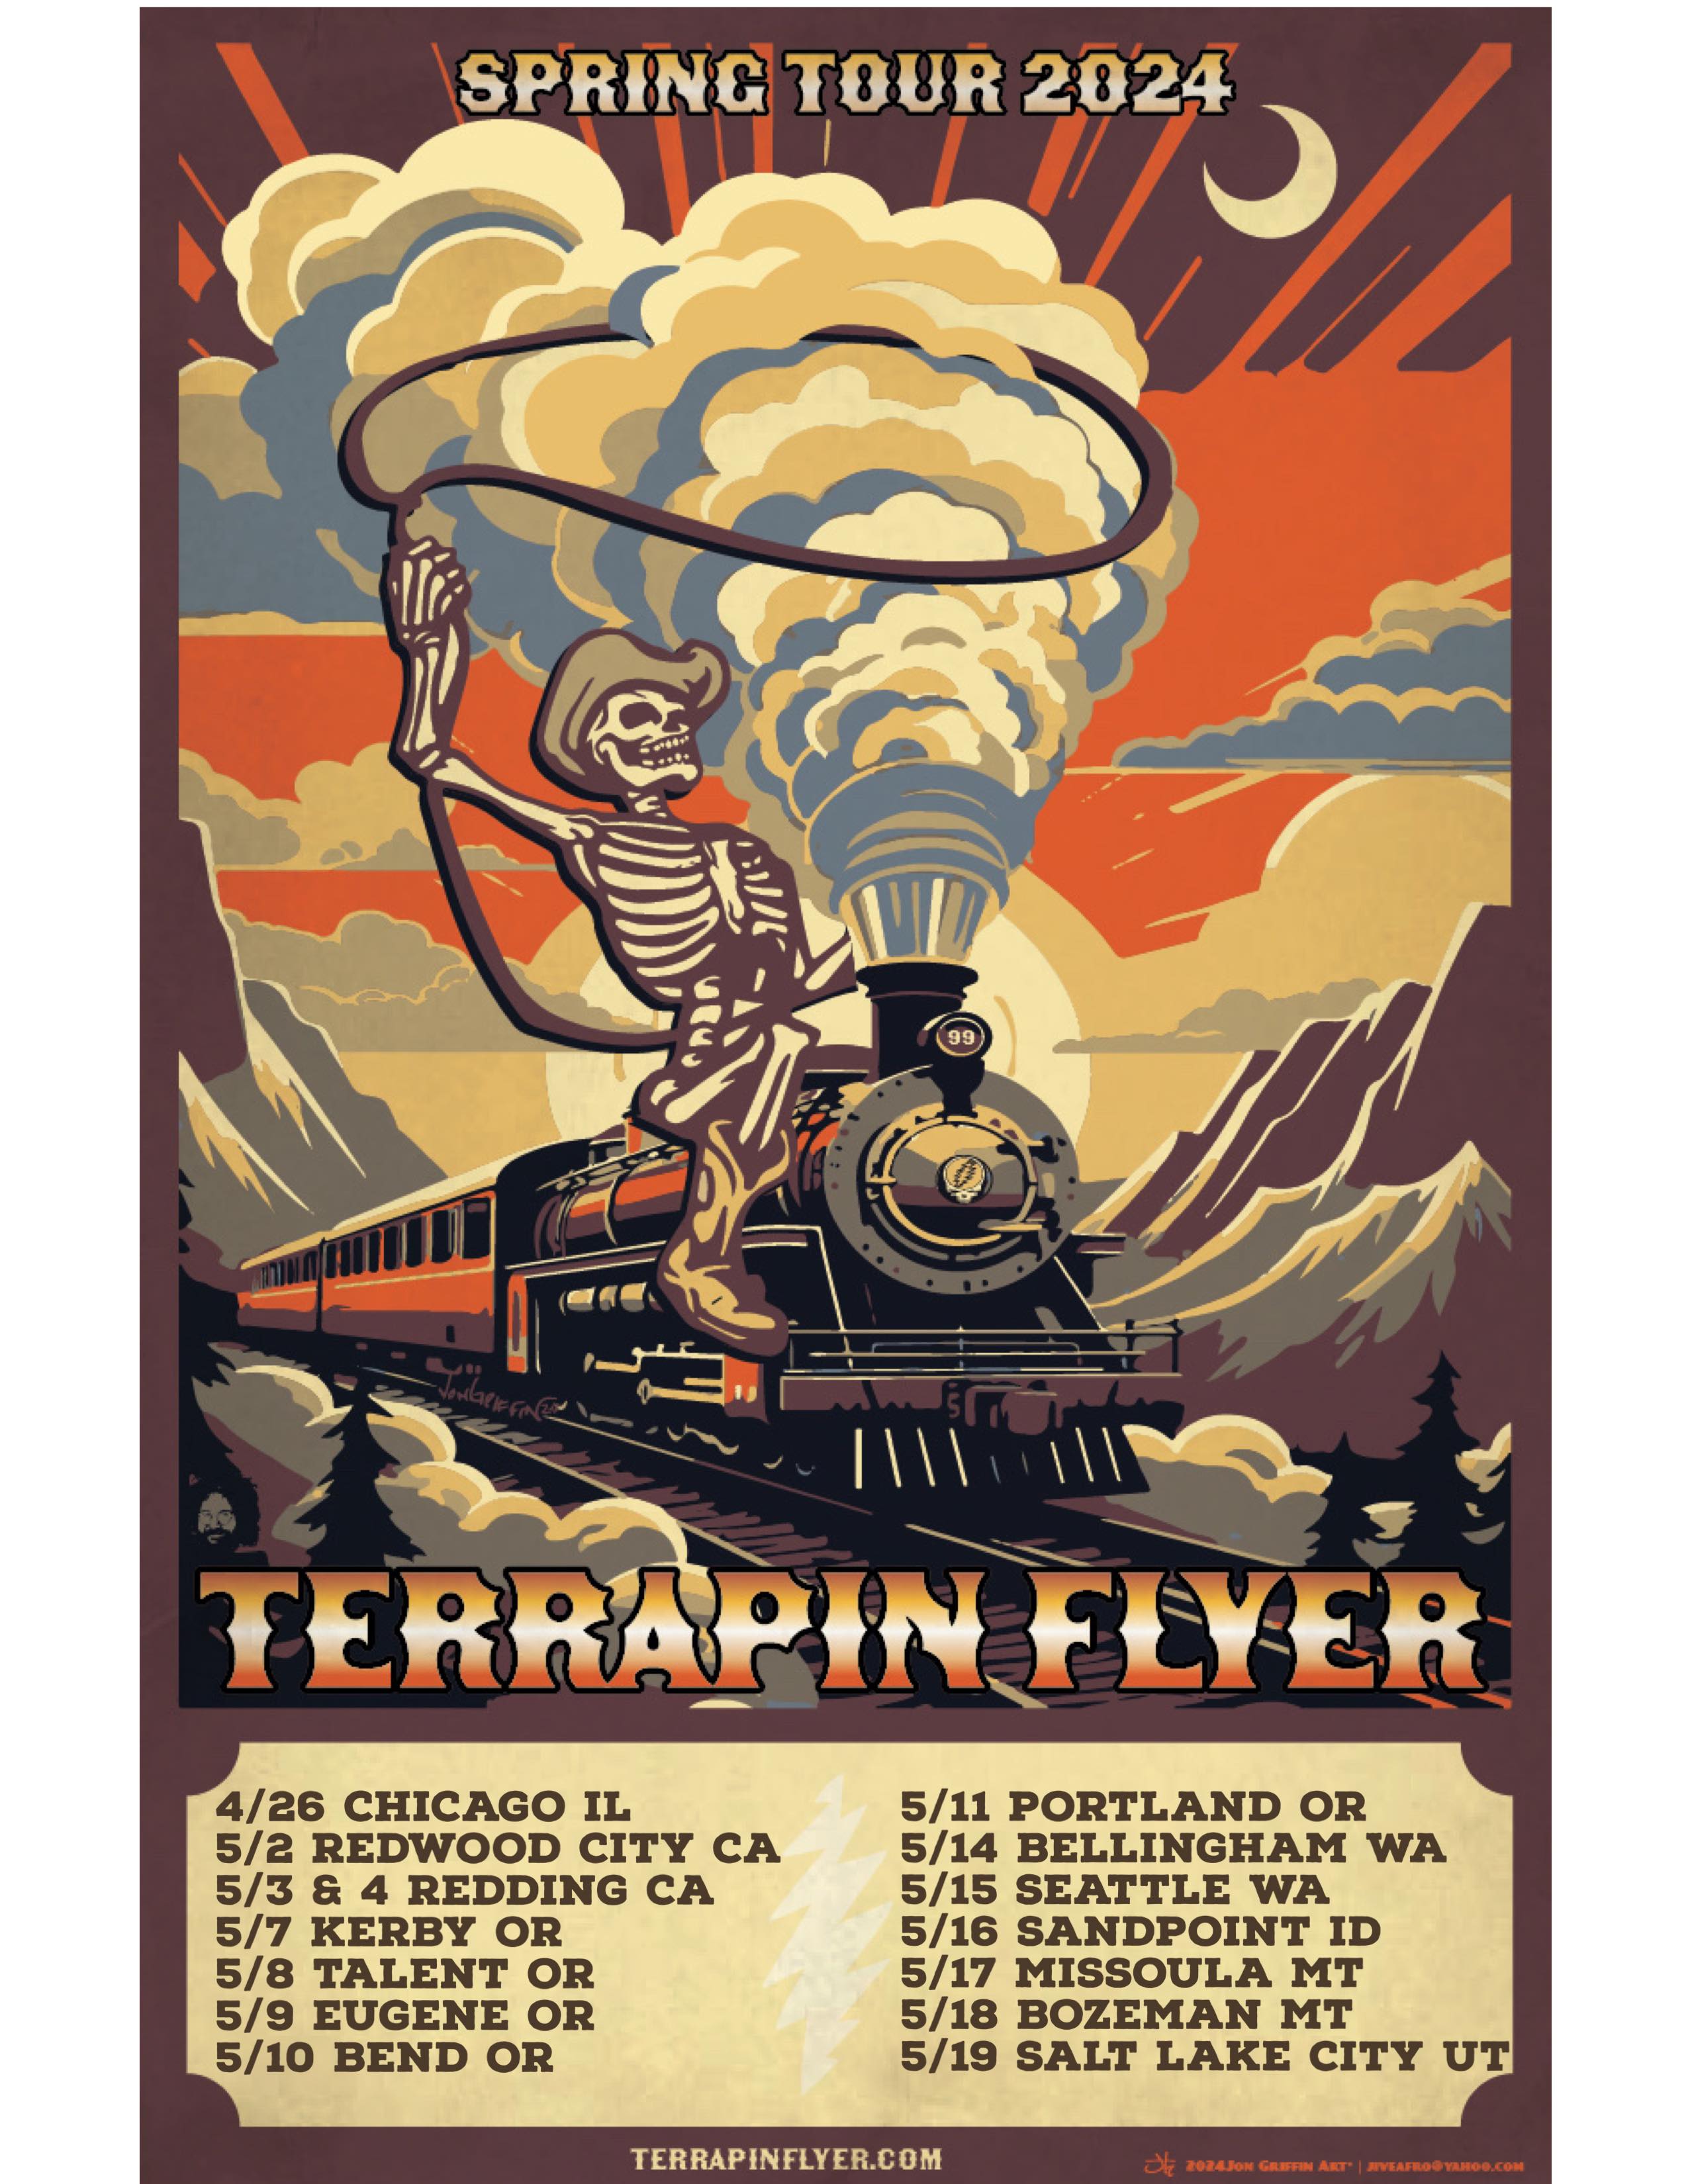 From Chicago to the Coast: Terrapin Flyer's Western Wonderland Tour